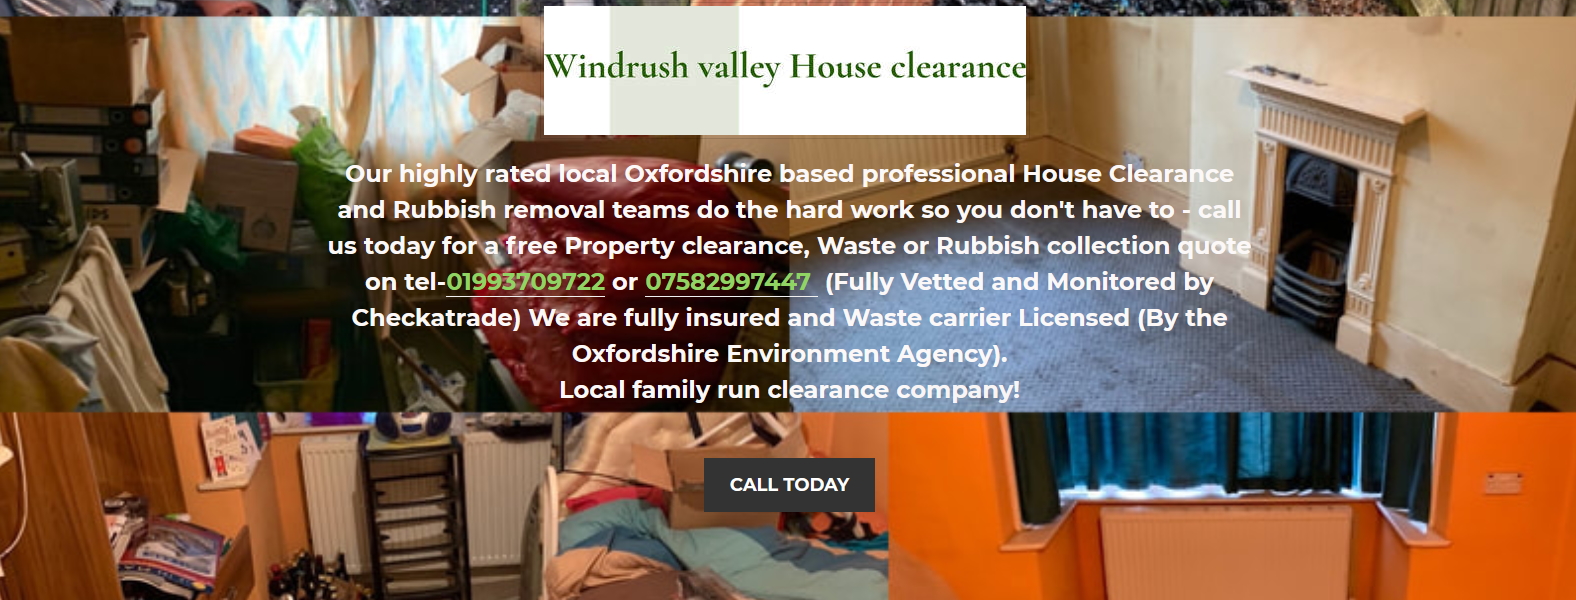 Windrush Valley House Clearance – AFTA Verified Member